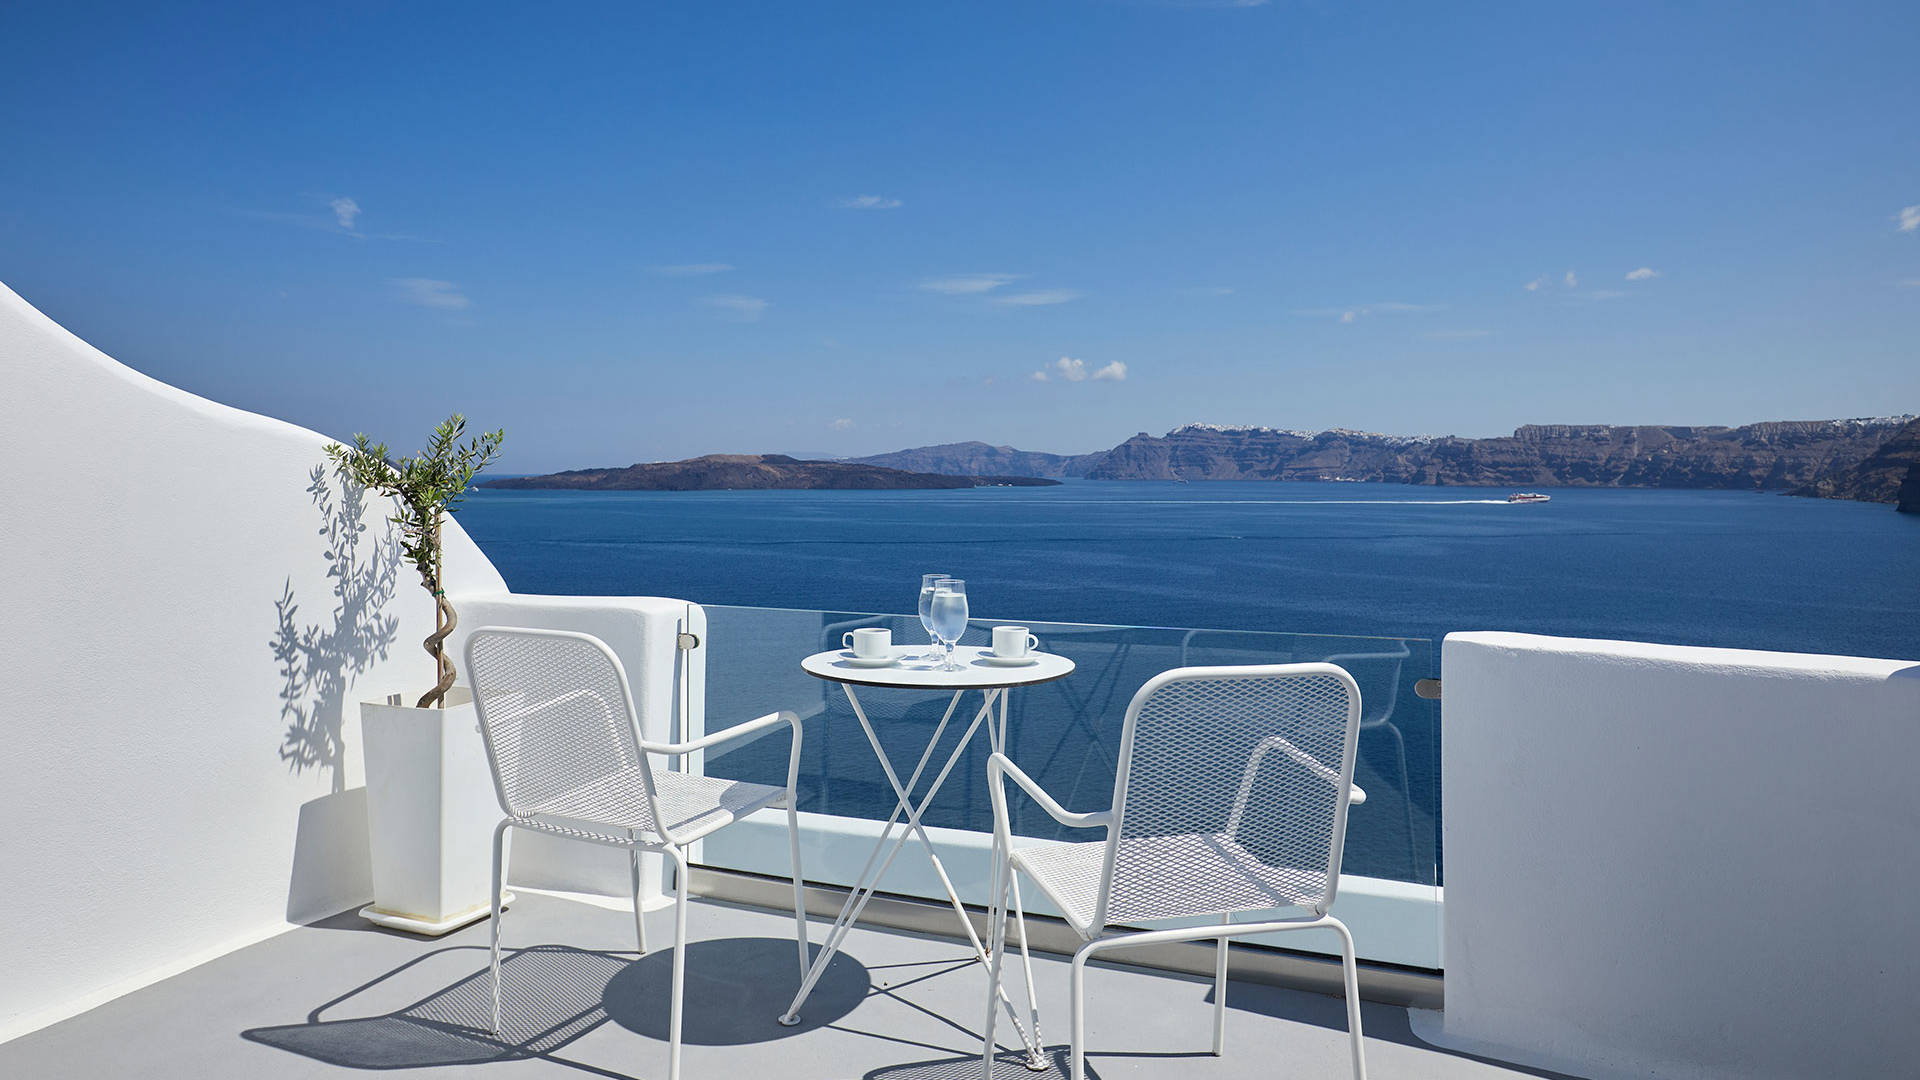 
Santorini View Hotel balcony in white colors with furniture and view at the aegean sea